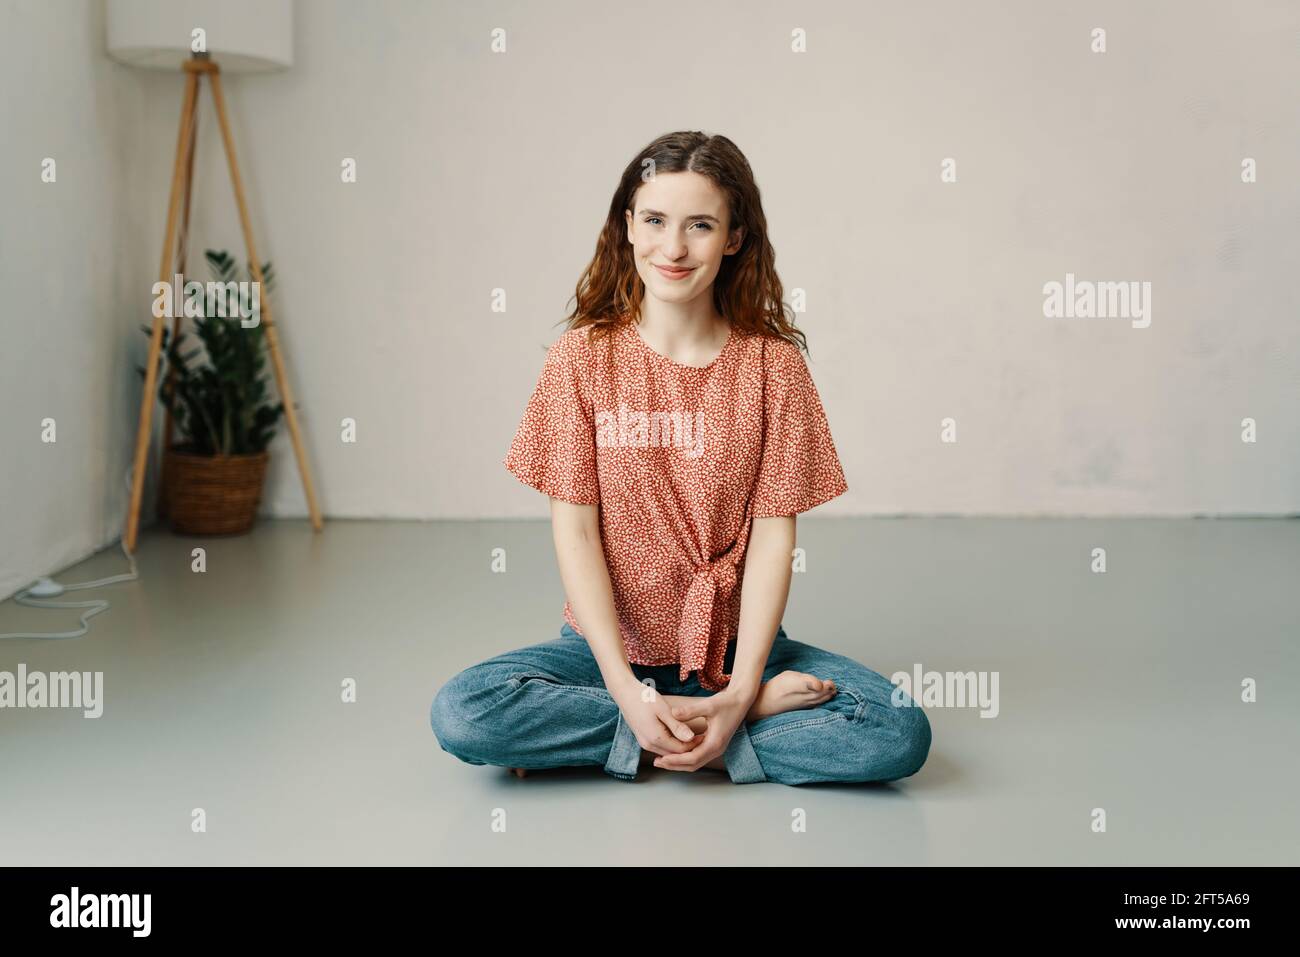 Young woman with a lovely wide warm friendly smile and sweet expression relaxing cross-legged on the floor in the lotus pose with bare feet and copysp Stock Photo